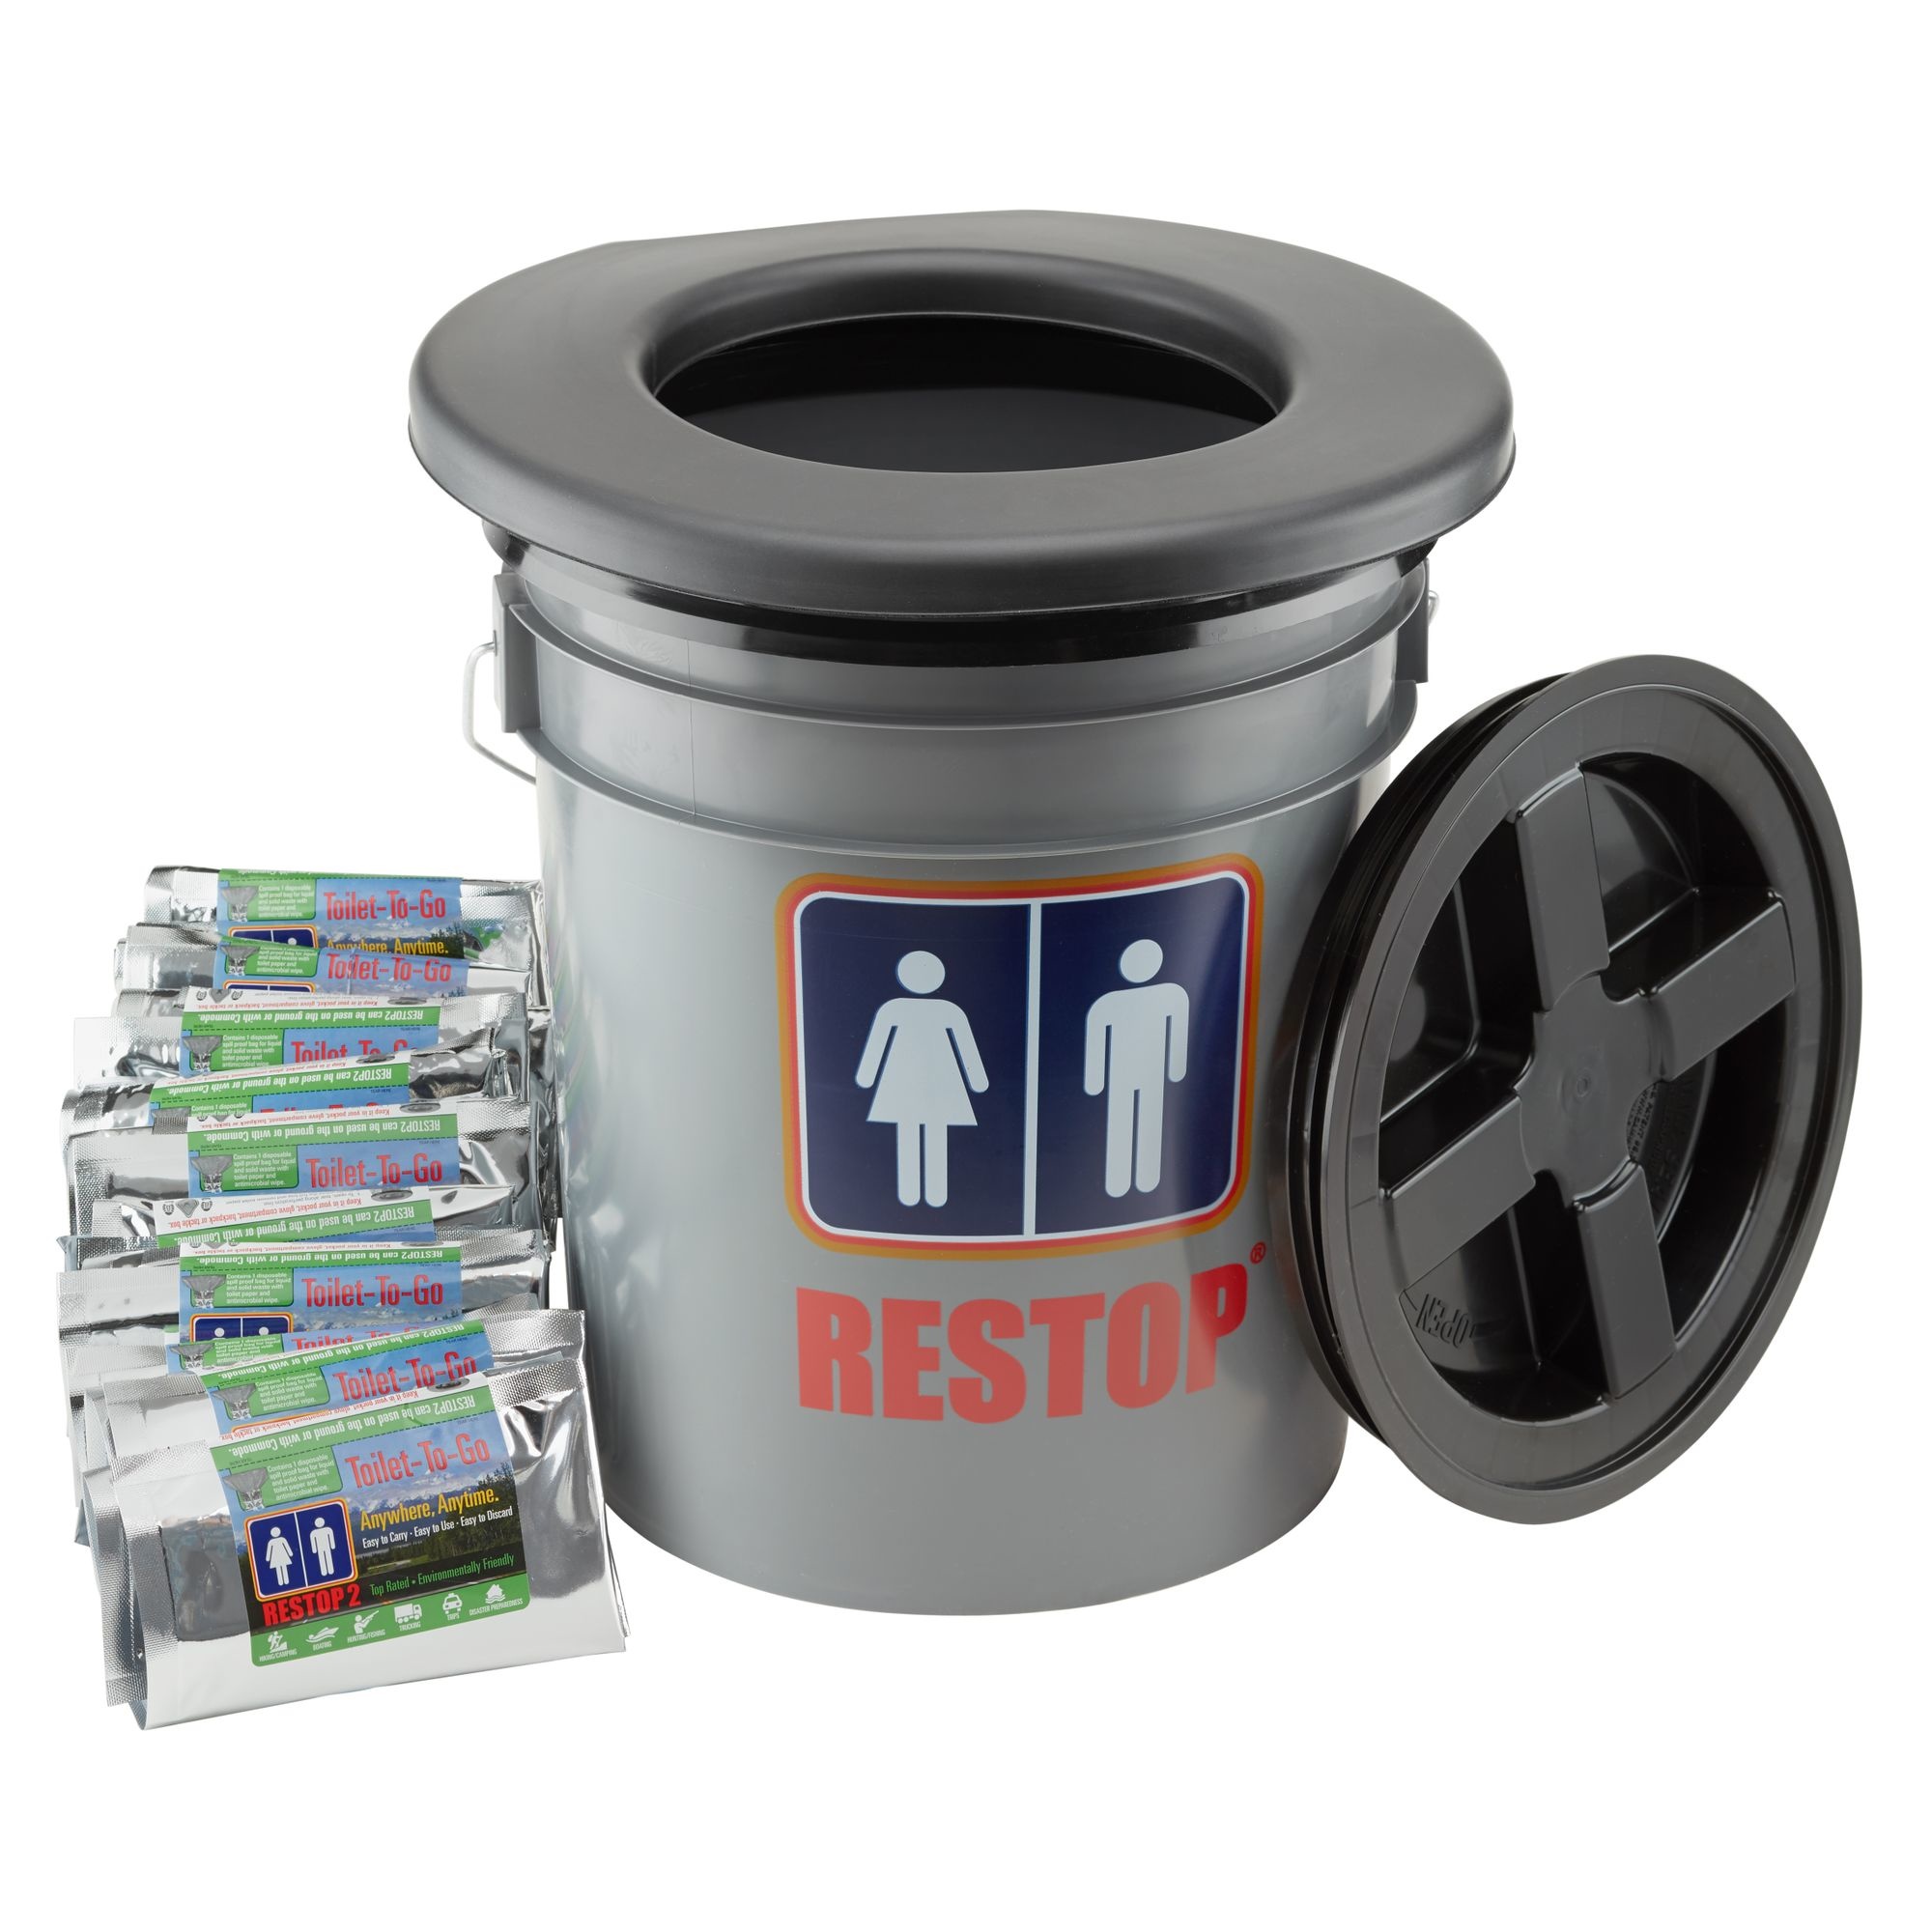 NRS Restop Commode Toilet With Bags